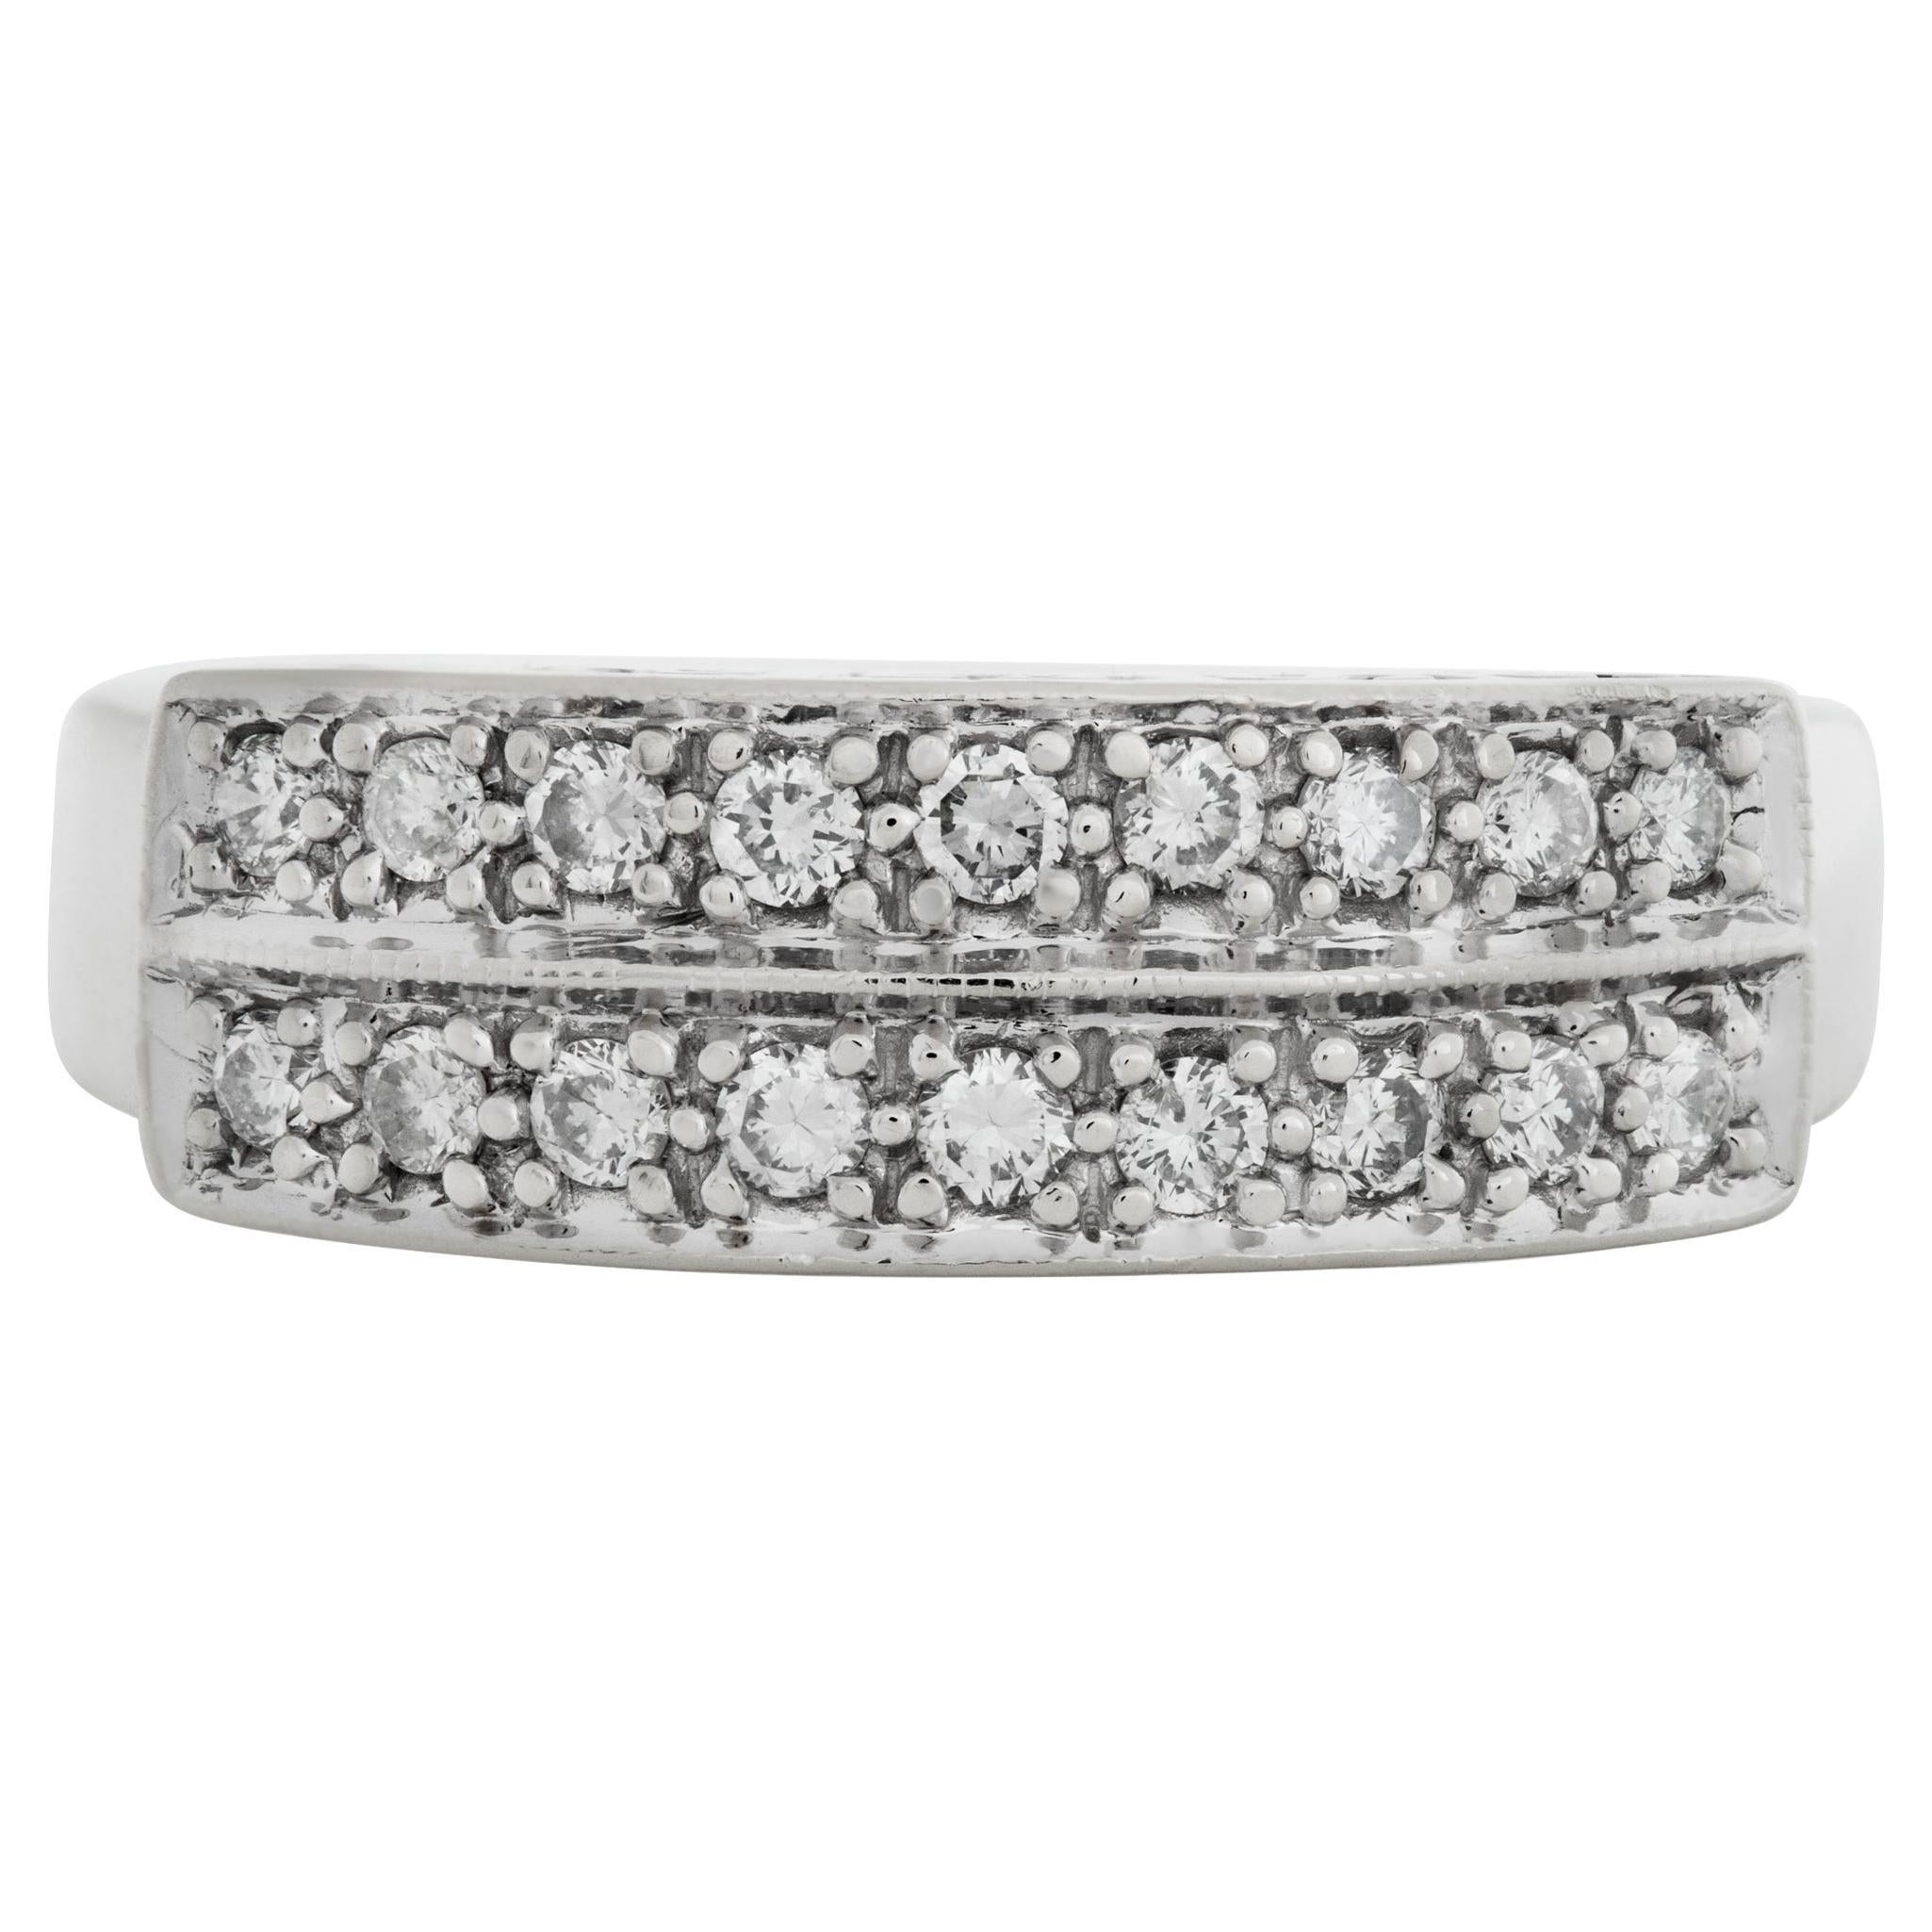 Double row diamond band in 14k white gold. 0.35 carats in diamonds; size 6 3/4